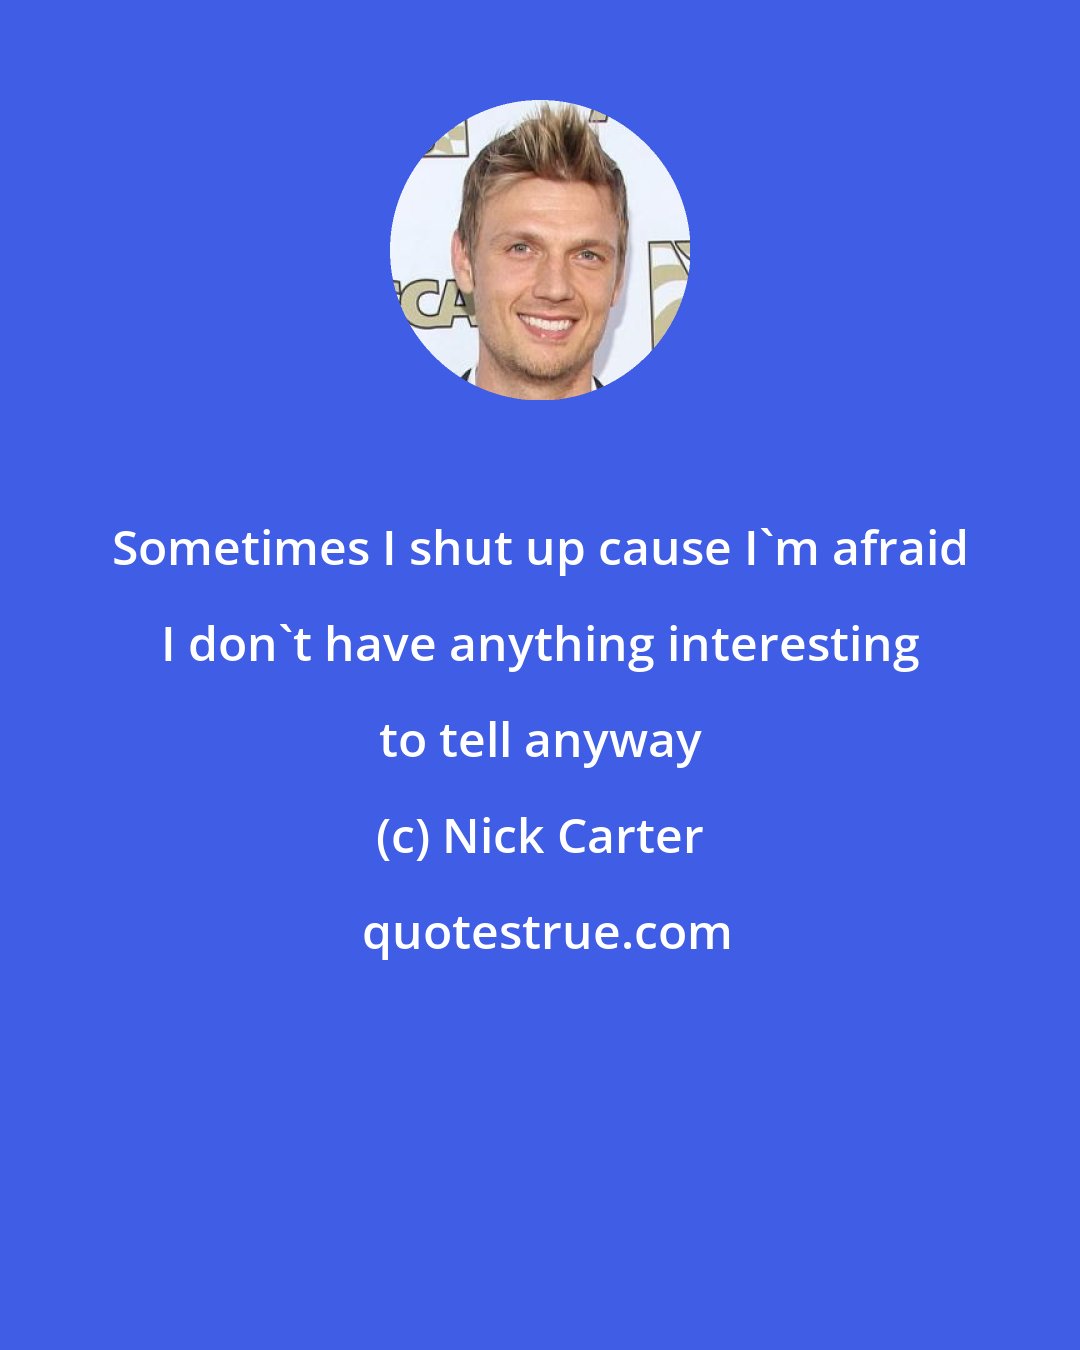 Nick Carter: Sometimes I shut up cause I'm afraid I don't have anything interesting to tell anyway